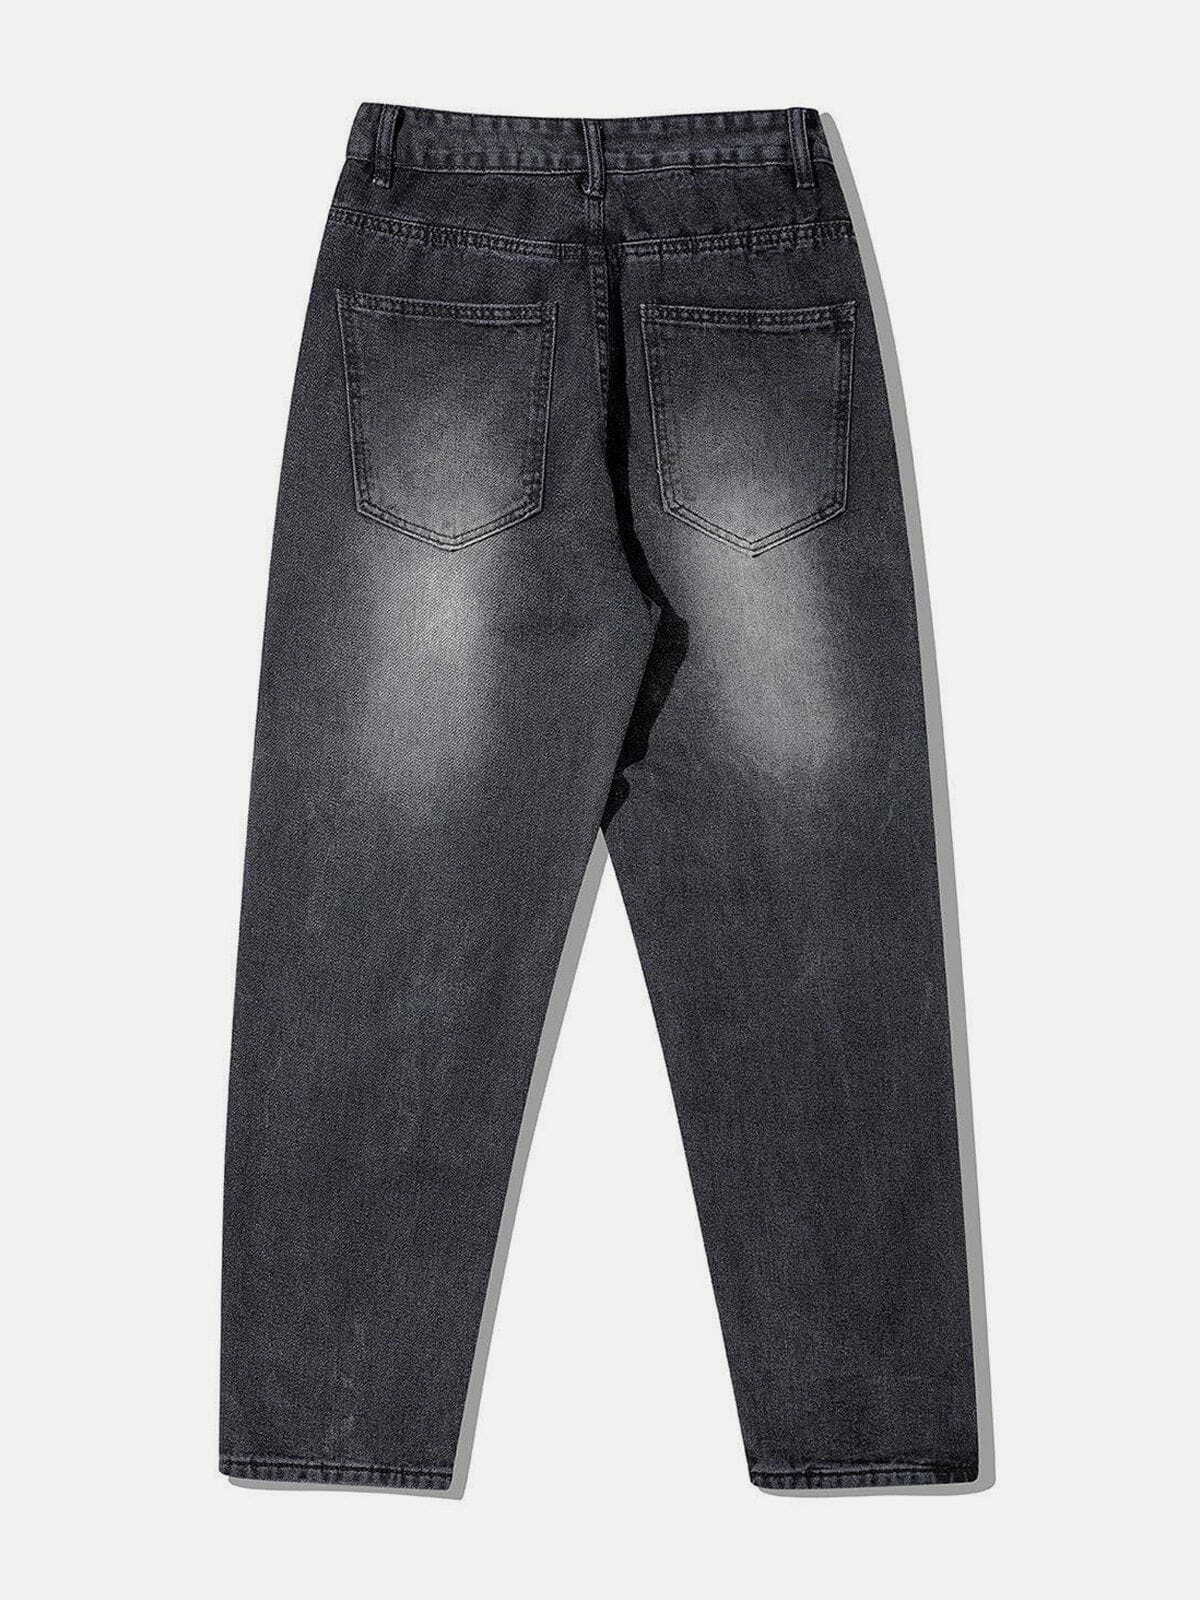 solid color washed jeans timeless & urban streetwear 6269